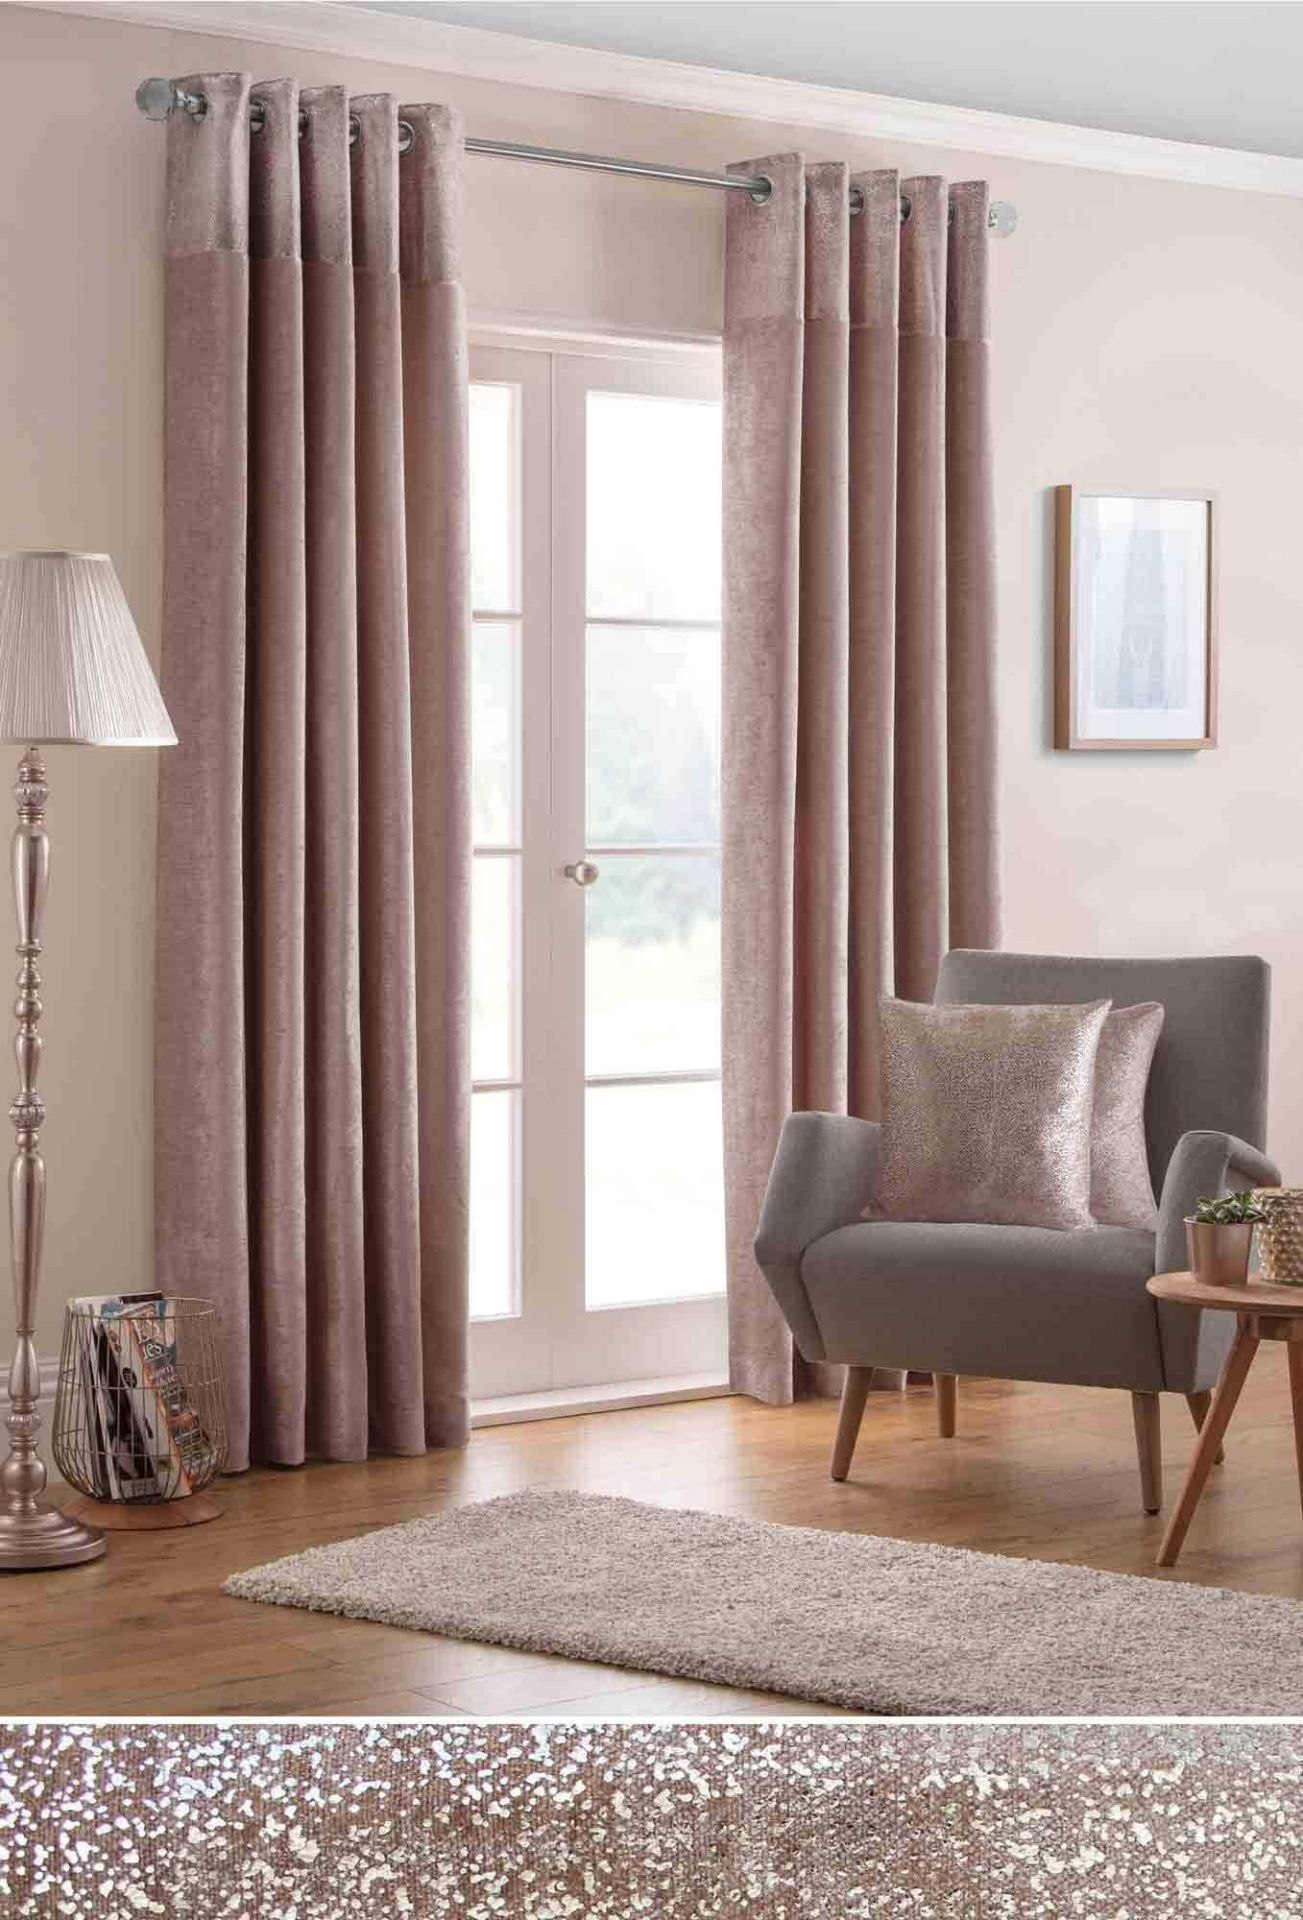 Combined Rrp £175 Lot To Contain 3 Assorted Curtains - Image 8 of 8